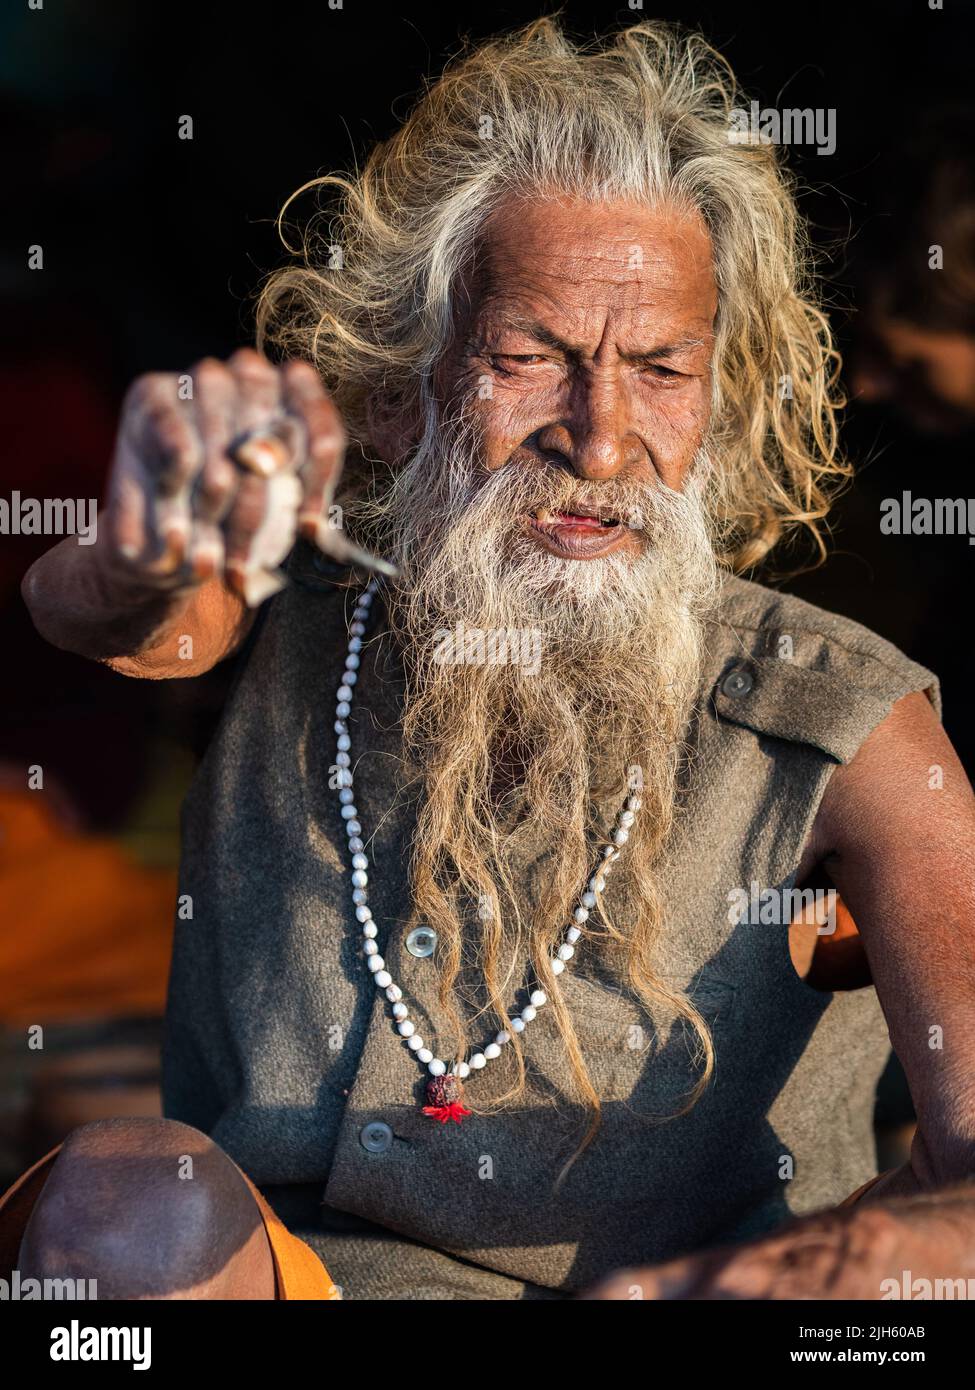 Indian holy man Amar Bharati Urdhavaahu, who has kept his arm raised for over 40 years in honour of Hindu God Shiva, at Kumbh Mela Festival in India. Stock Photo